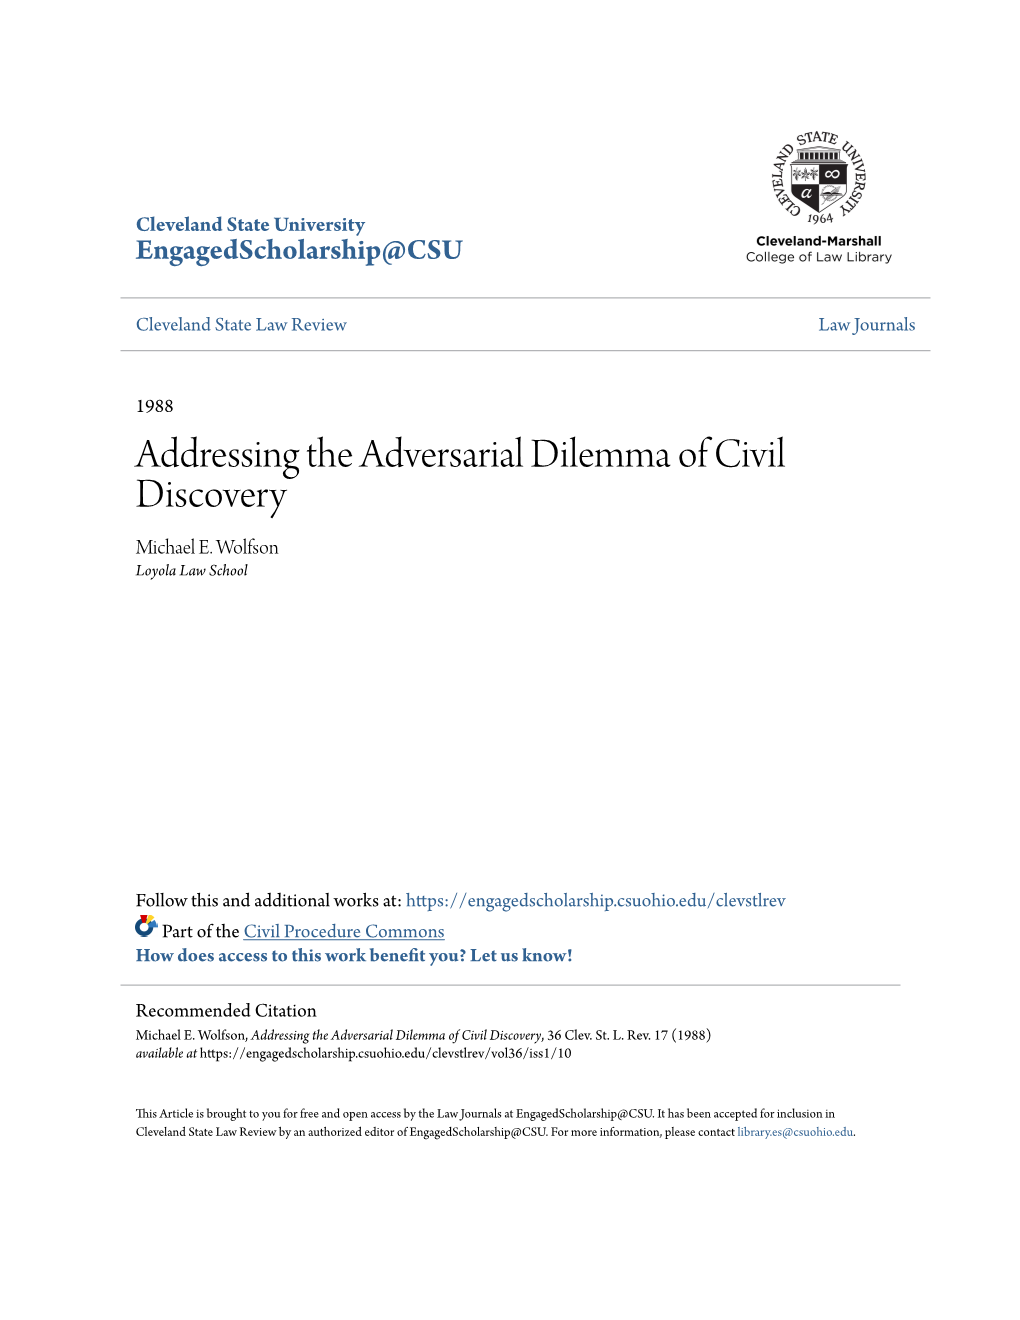 Addressing the Adversarial Dilemma of Civil Discovery Michael E